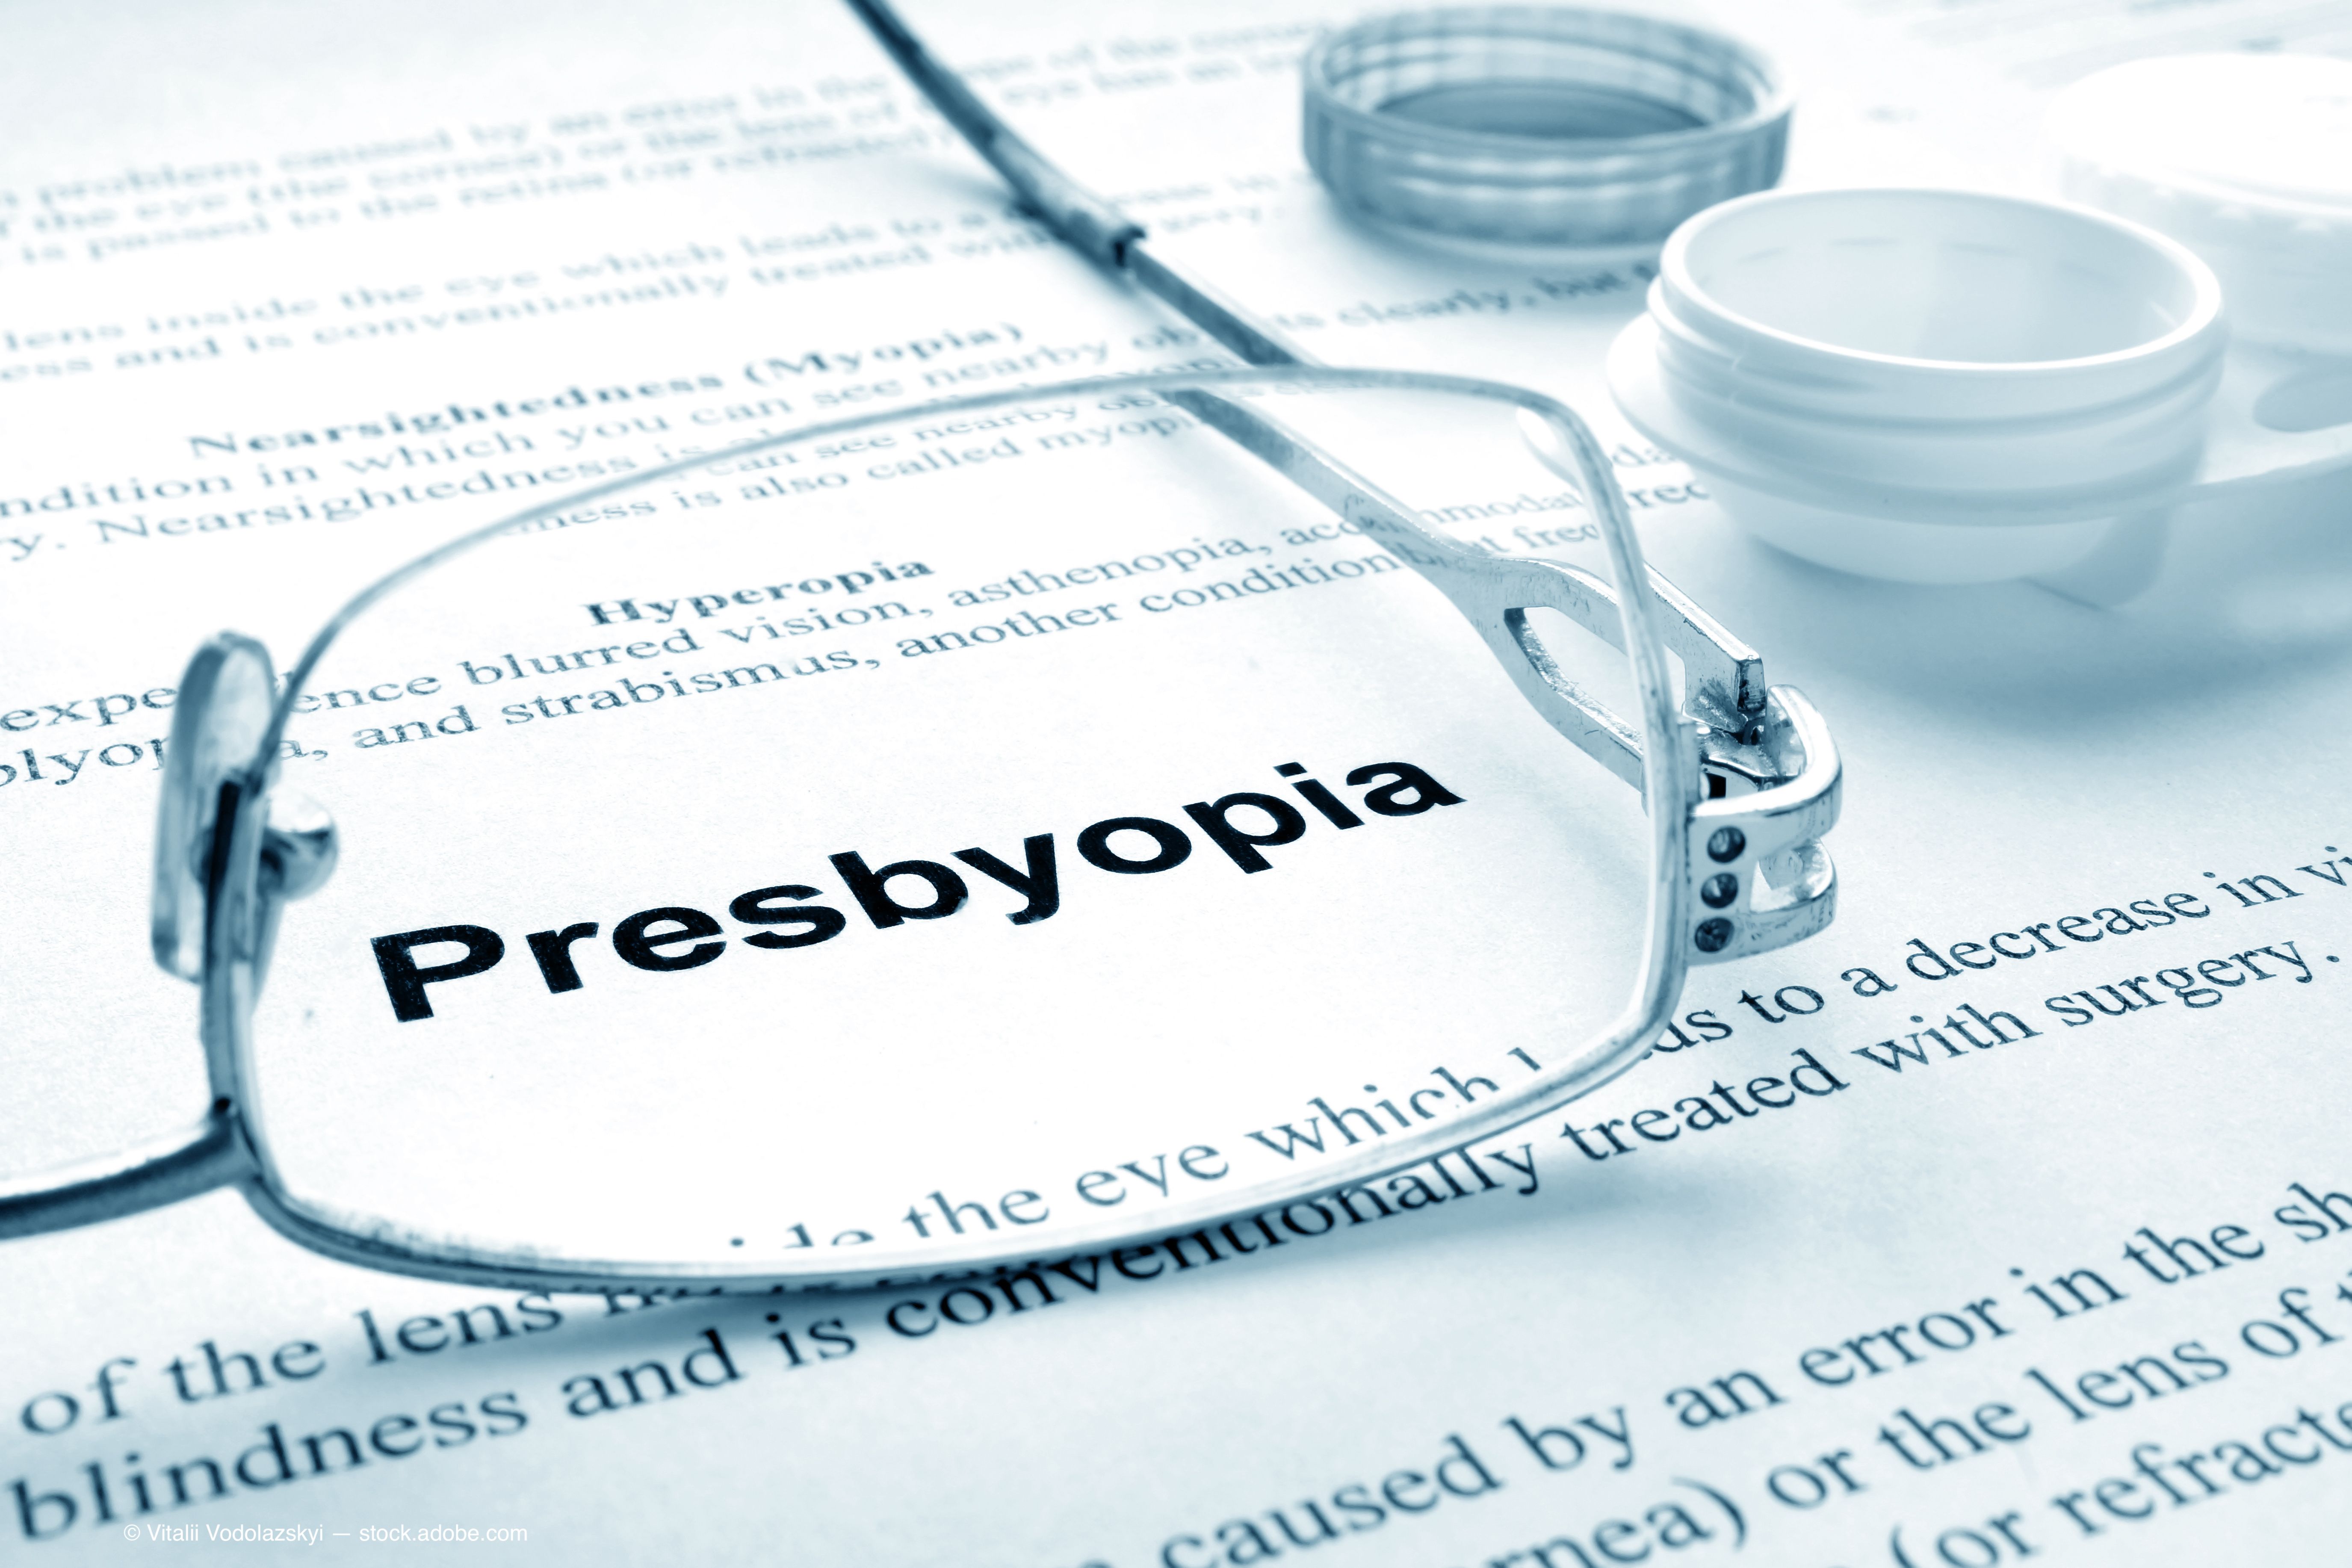 Is presbyopia the newest specialty?